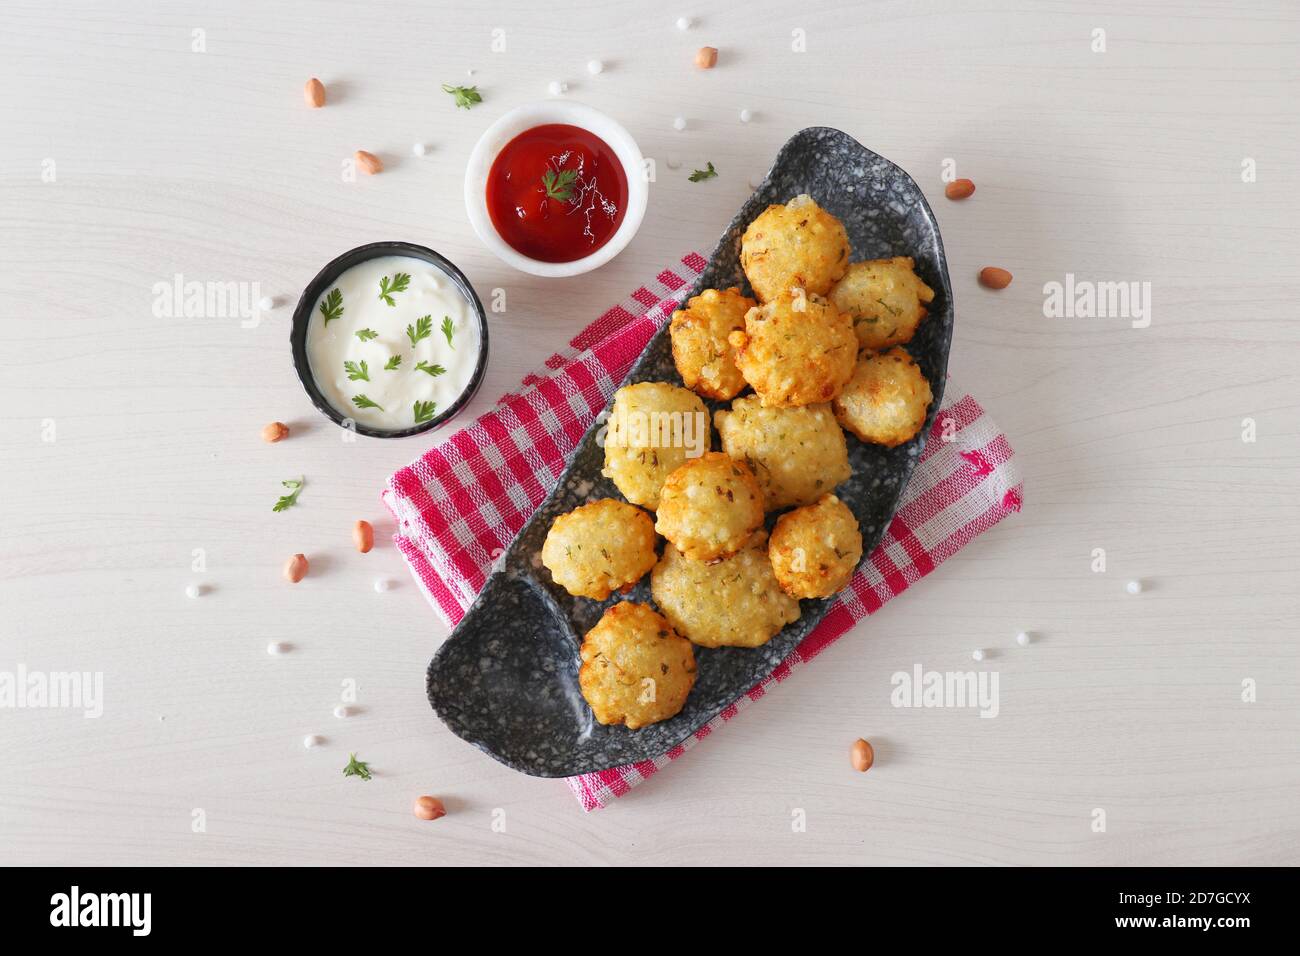 Sabudana vada or Sago fried fitters served with Curd or yogurt and ketchup over white wooden background, popular fasting recipe from India Stock Photo